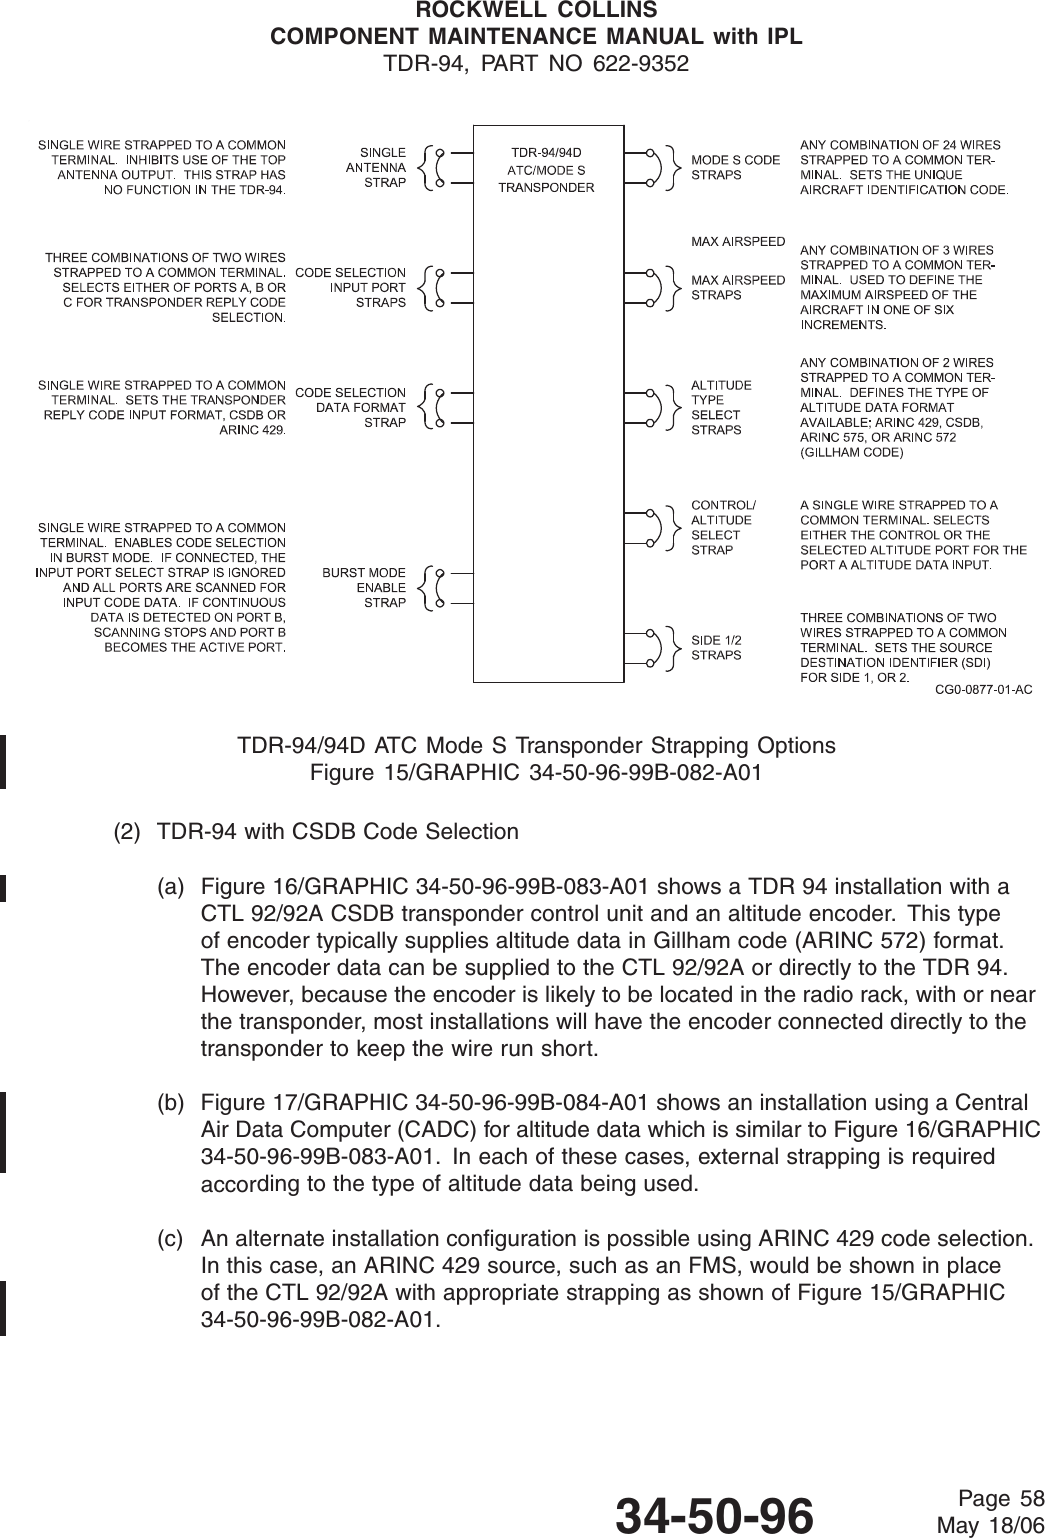 ROCKWELL COLLINSCOMPONENT MAINTENANCE MANUAL with IPLTDR-94, PART NO 622-9352TDR-94/94D ATC Mode S Transponder Strapping OptionsFigure 15/GRAPHIC 34-50-96-99B-082-A01(2) TDR-94 with CSDB Code Selection(a) Figure 16/GRAPHIC 34-50-96-99B-083-A01 shows a TDR 94 installation with aCTL 92/92A CSDB transponder control unit and an altitude encoder. This typeof encoder typically supplies altitude data in Gillham code (ARINC 572) format.The encoder data can be supplied to the CTL 92/92A or directly to the TDR 94.However, because the encoder is likely to be located in the radio rack, with or nearthe transponder, most installations will have the encoder connected directly to thetransponder to keep the wire run short.(b) Figure 17/GRAPHIC 34-50-96-99B-084-A01 shows an installation using a CentralAir Data Computer (CADC) for altitude data which is similar to Figure 16/GRAPHIC34-50-96-99B-083-A01. In each of these cases, external strapping is requiredaccording to the type of altitude data being used.(c) An alternate installation configuration is possible using ARINC 429 code selection.In this case, an ARINC 429 source, such as an FMS, would be shown in placeof the CTL 92/92A with appropriate strapping as shown of Figure 15/GRAPHIC34-50-96-99B-082-A01.34-50-96 Page 58May 18/06